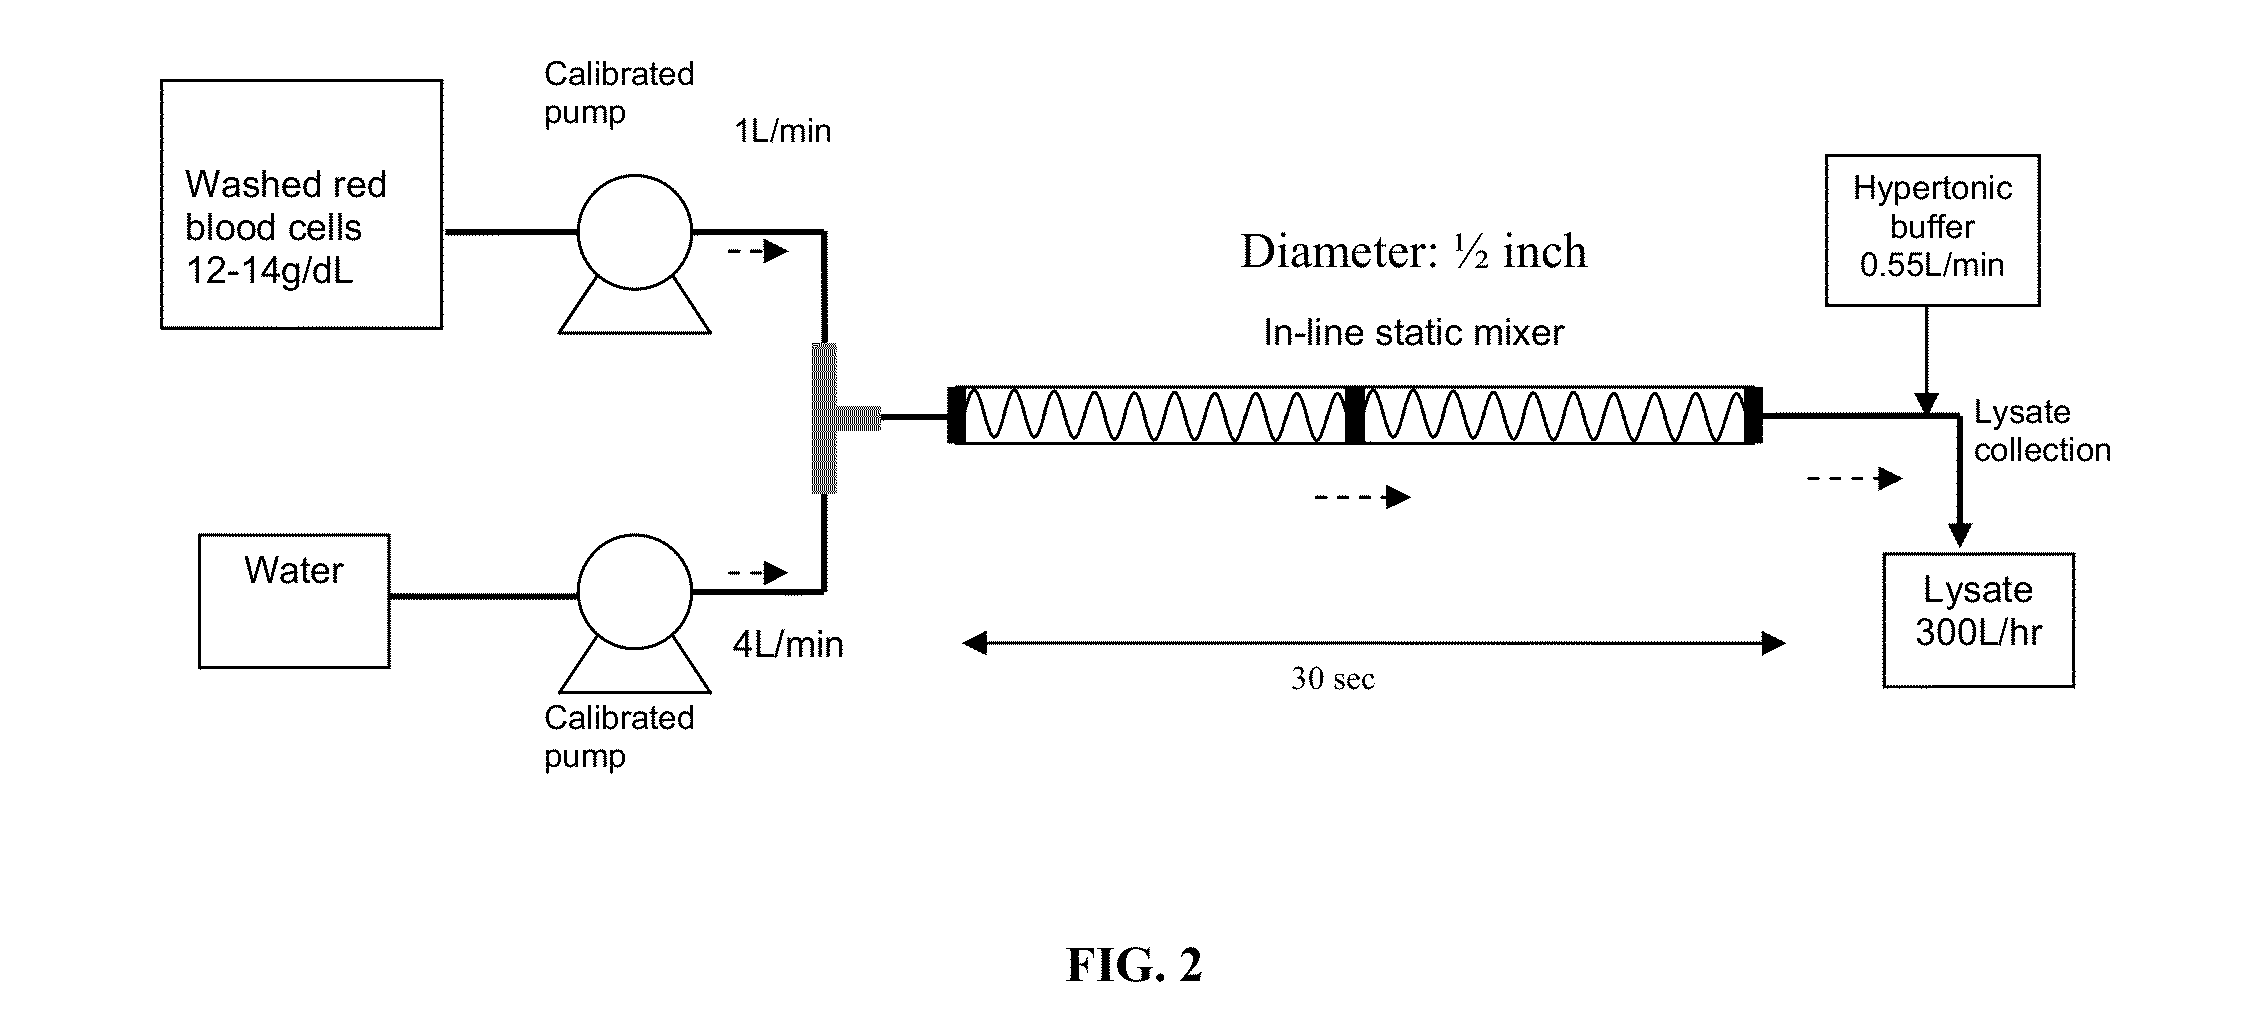 Method for the preparation of a heat stable oxygen carrier-containing composition facilating beta-beta cross-linking